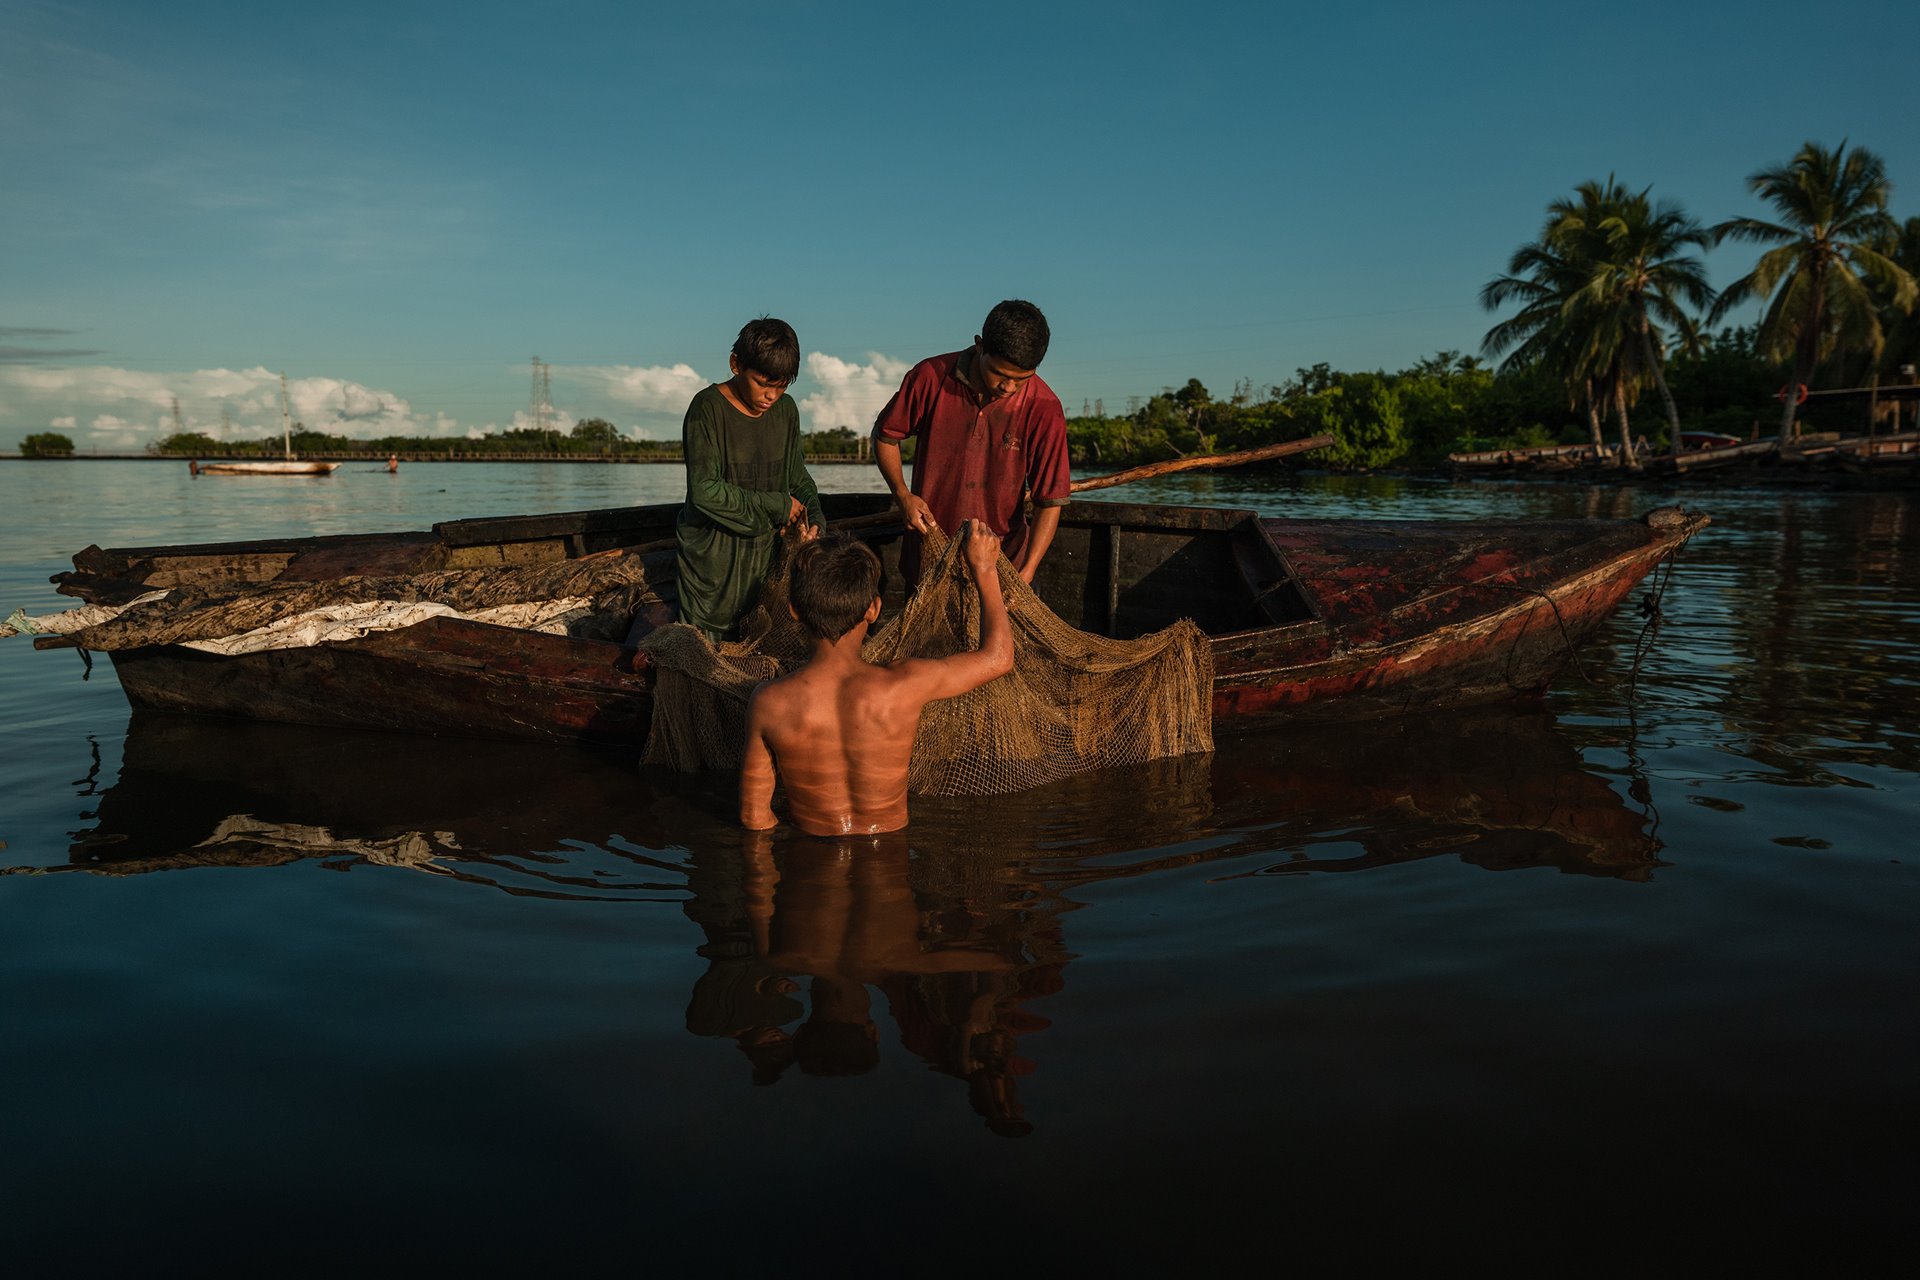 Diego Méndez (14), Manuel Méndez (13), and Miguel Méndez (16) fish in Lake Maracaibo, Cabimas, Venezuela. Crude oil from damaged pipelines spilled into the lake smears fishing boats, clogs outboard motors and damages nets.&nbsp;